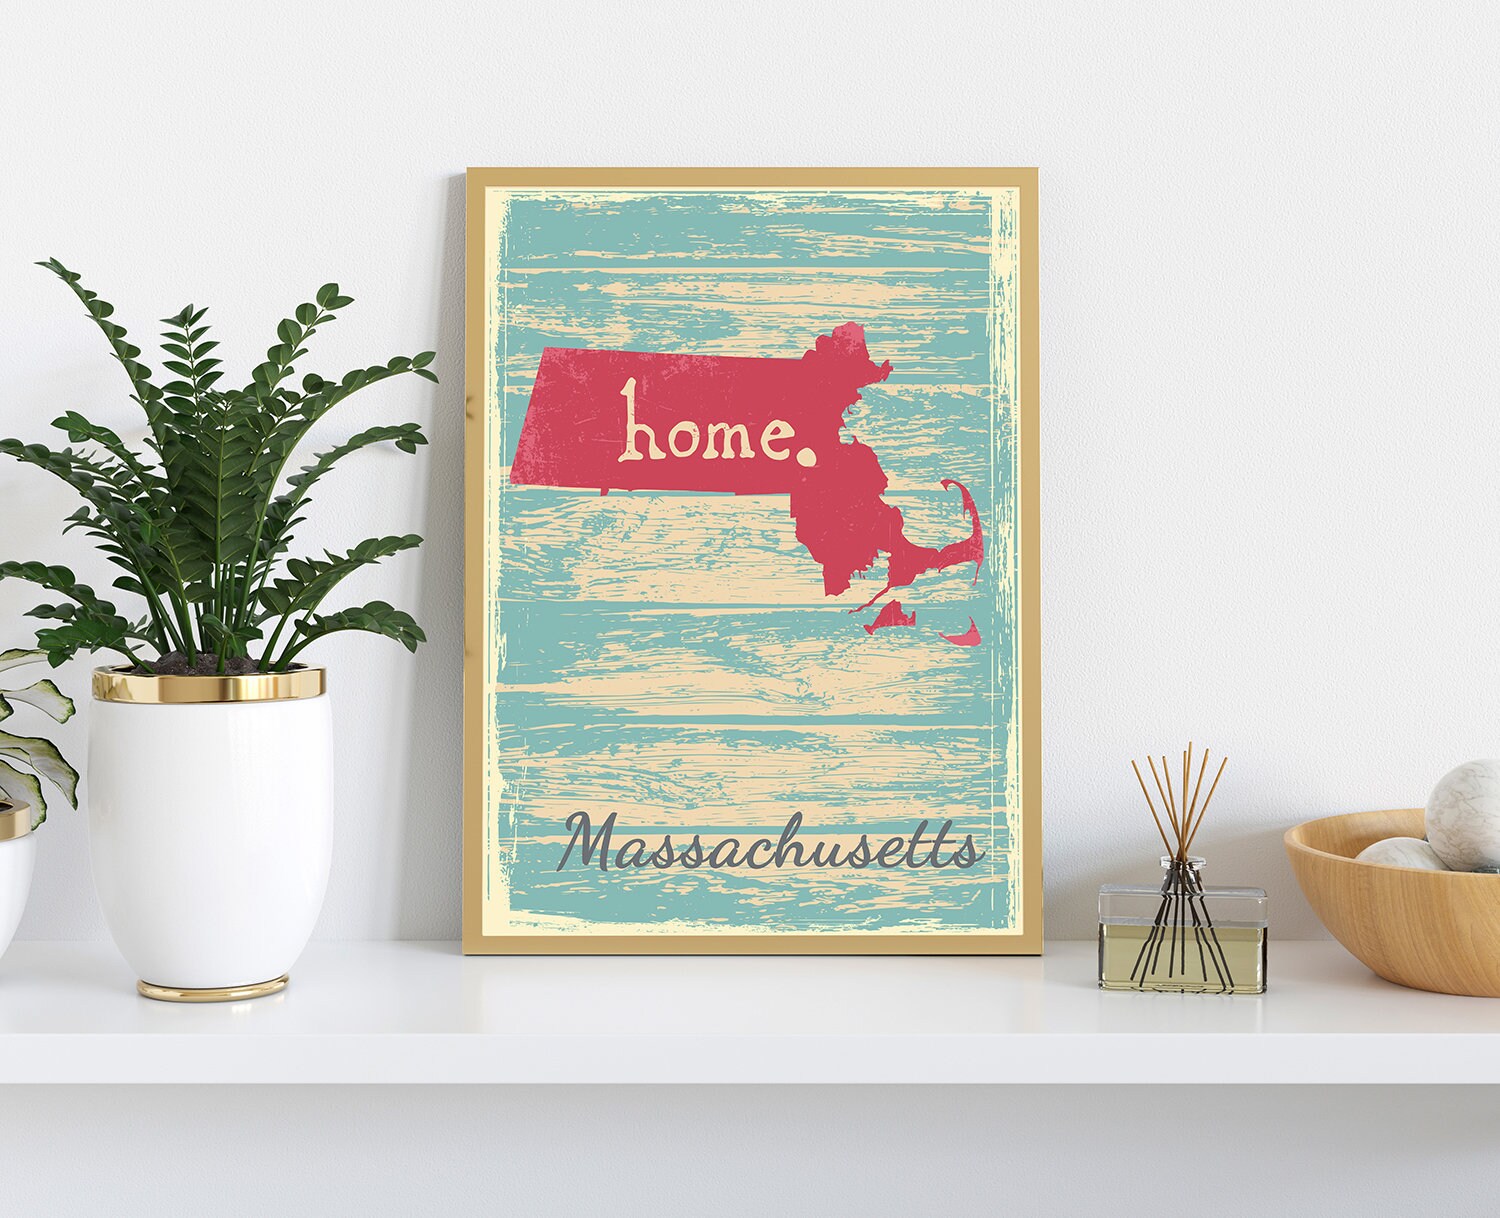 Retro Style Travel Poster, Massachusetts Vintage State Poster Printing, Home Wall Art, Office Wall  Decor, Poster Prints, Massachusetts Map